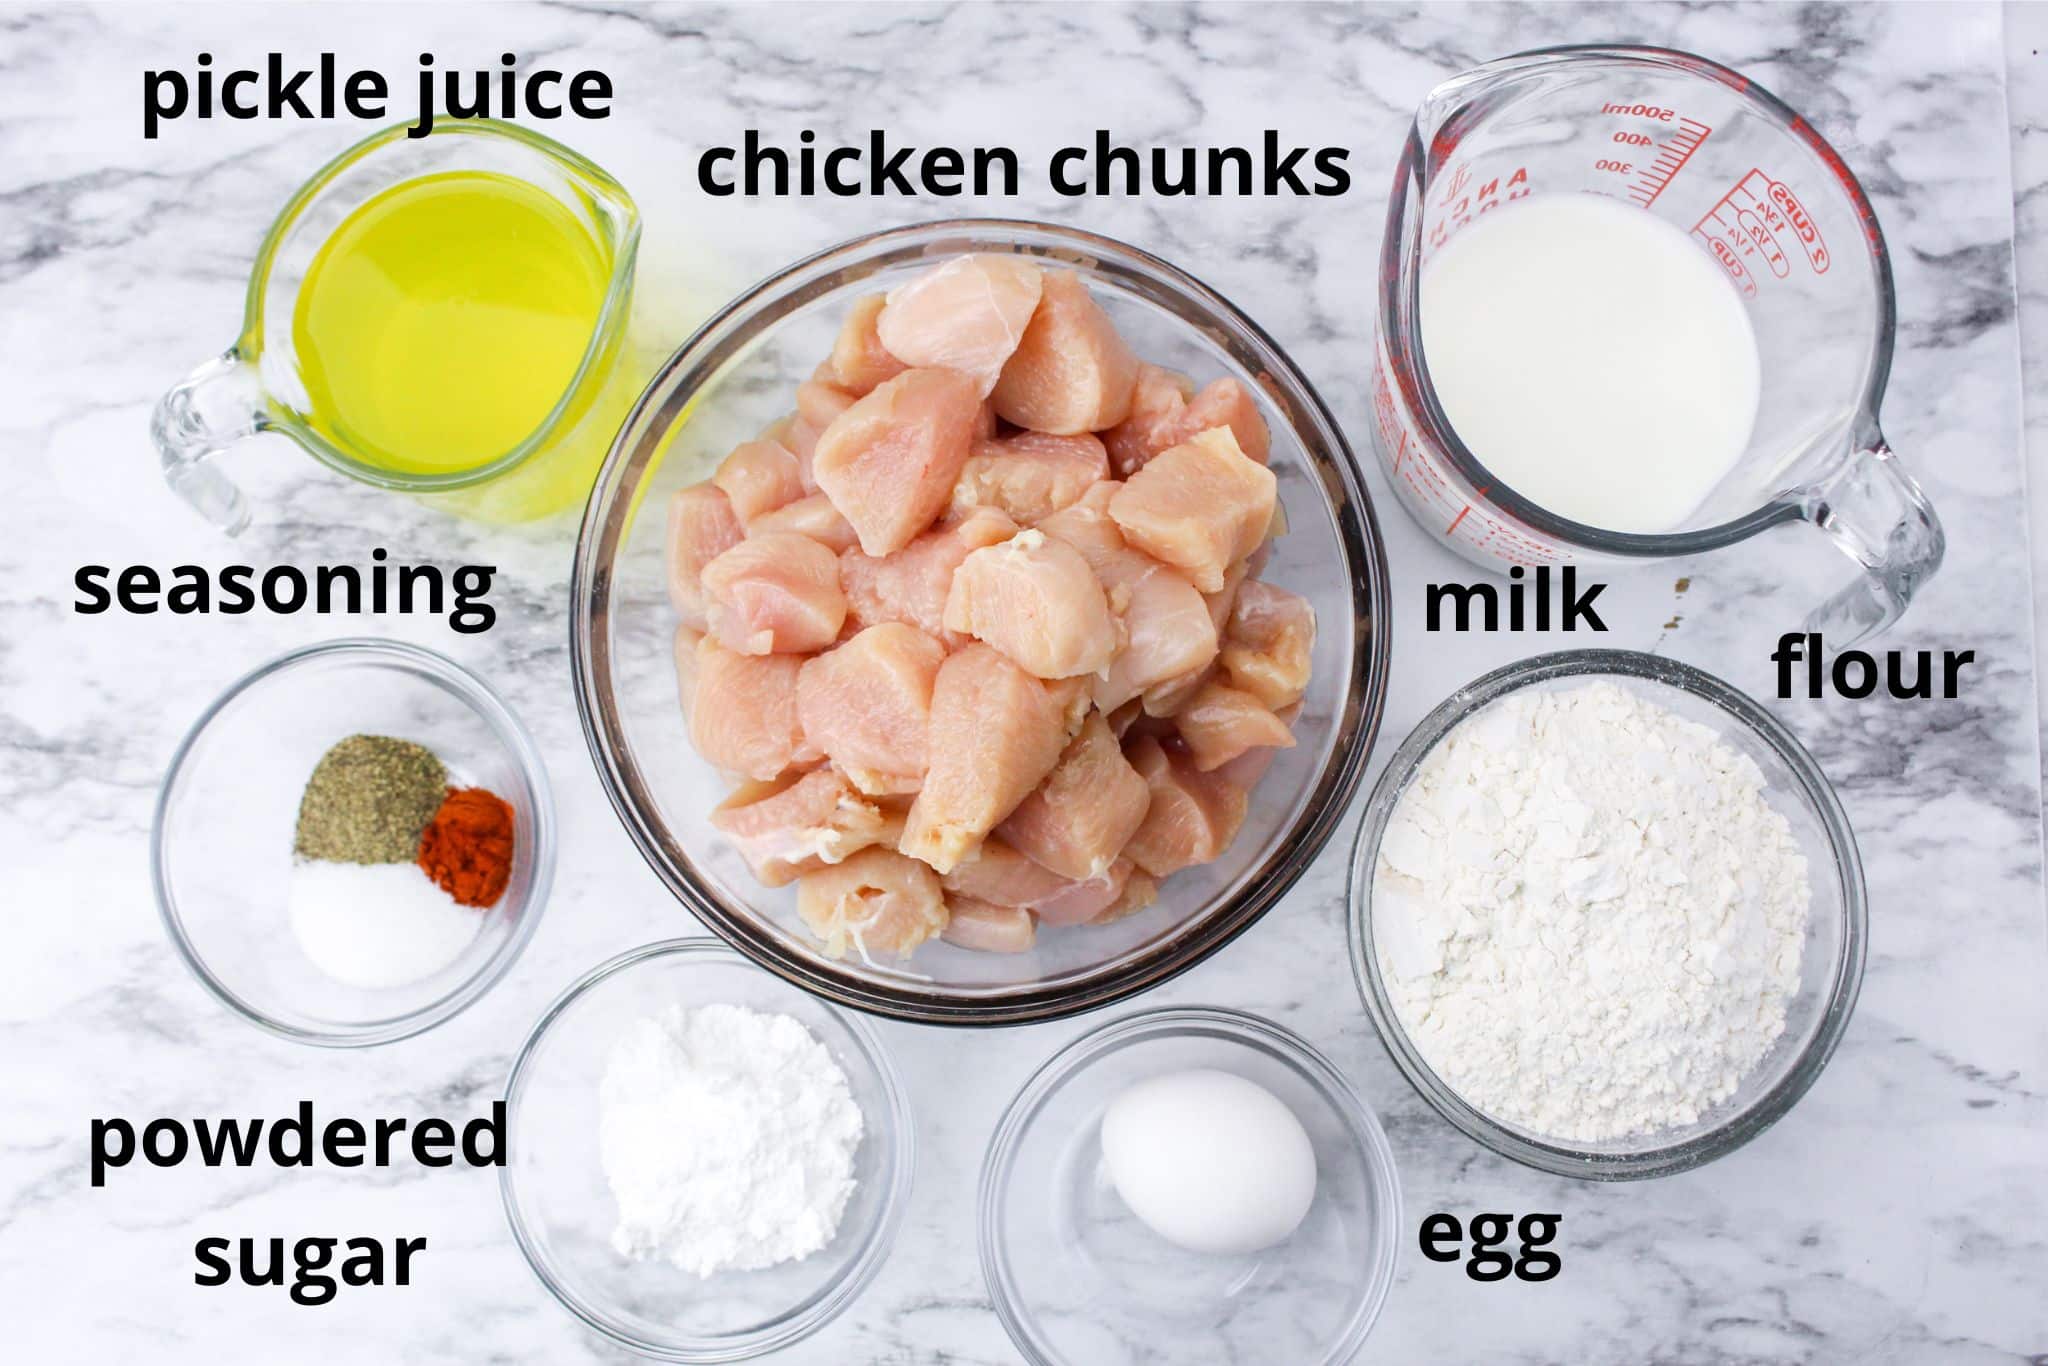 pickle juice, chicken chunks, milk, flour, seasoning, powdered sugar, egg on a marble counter